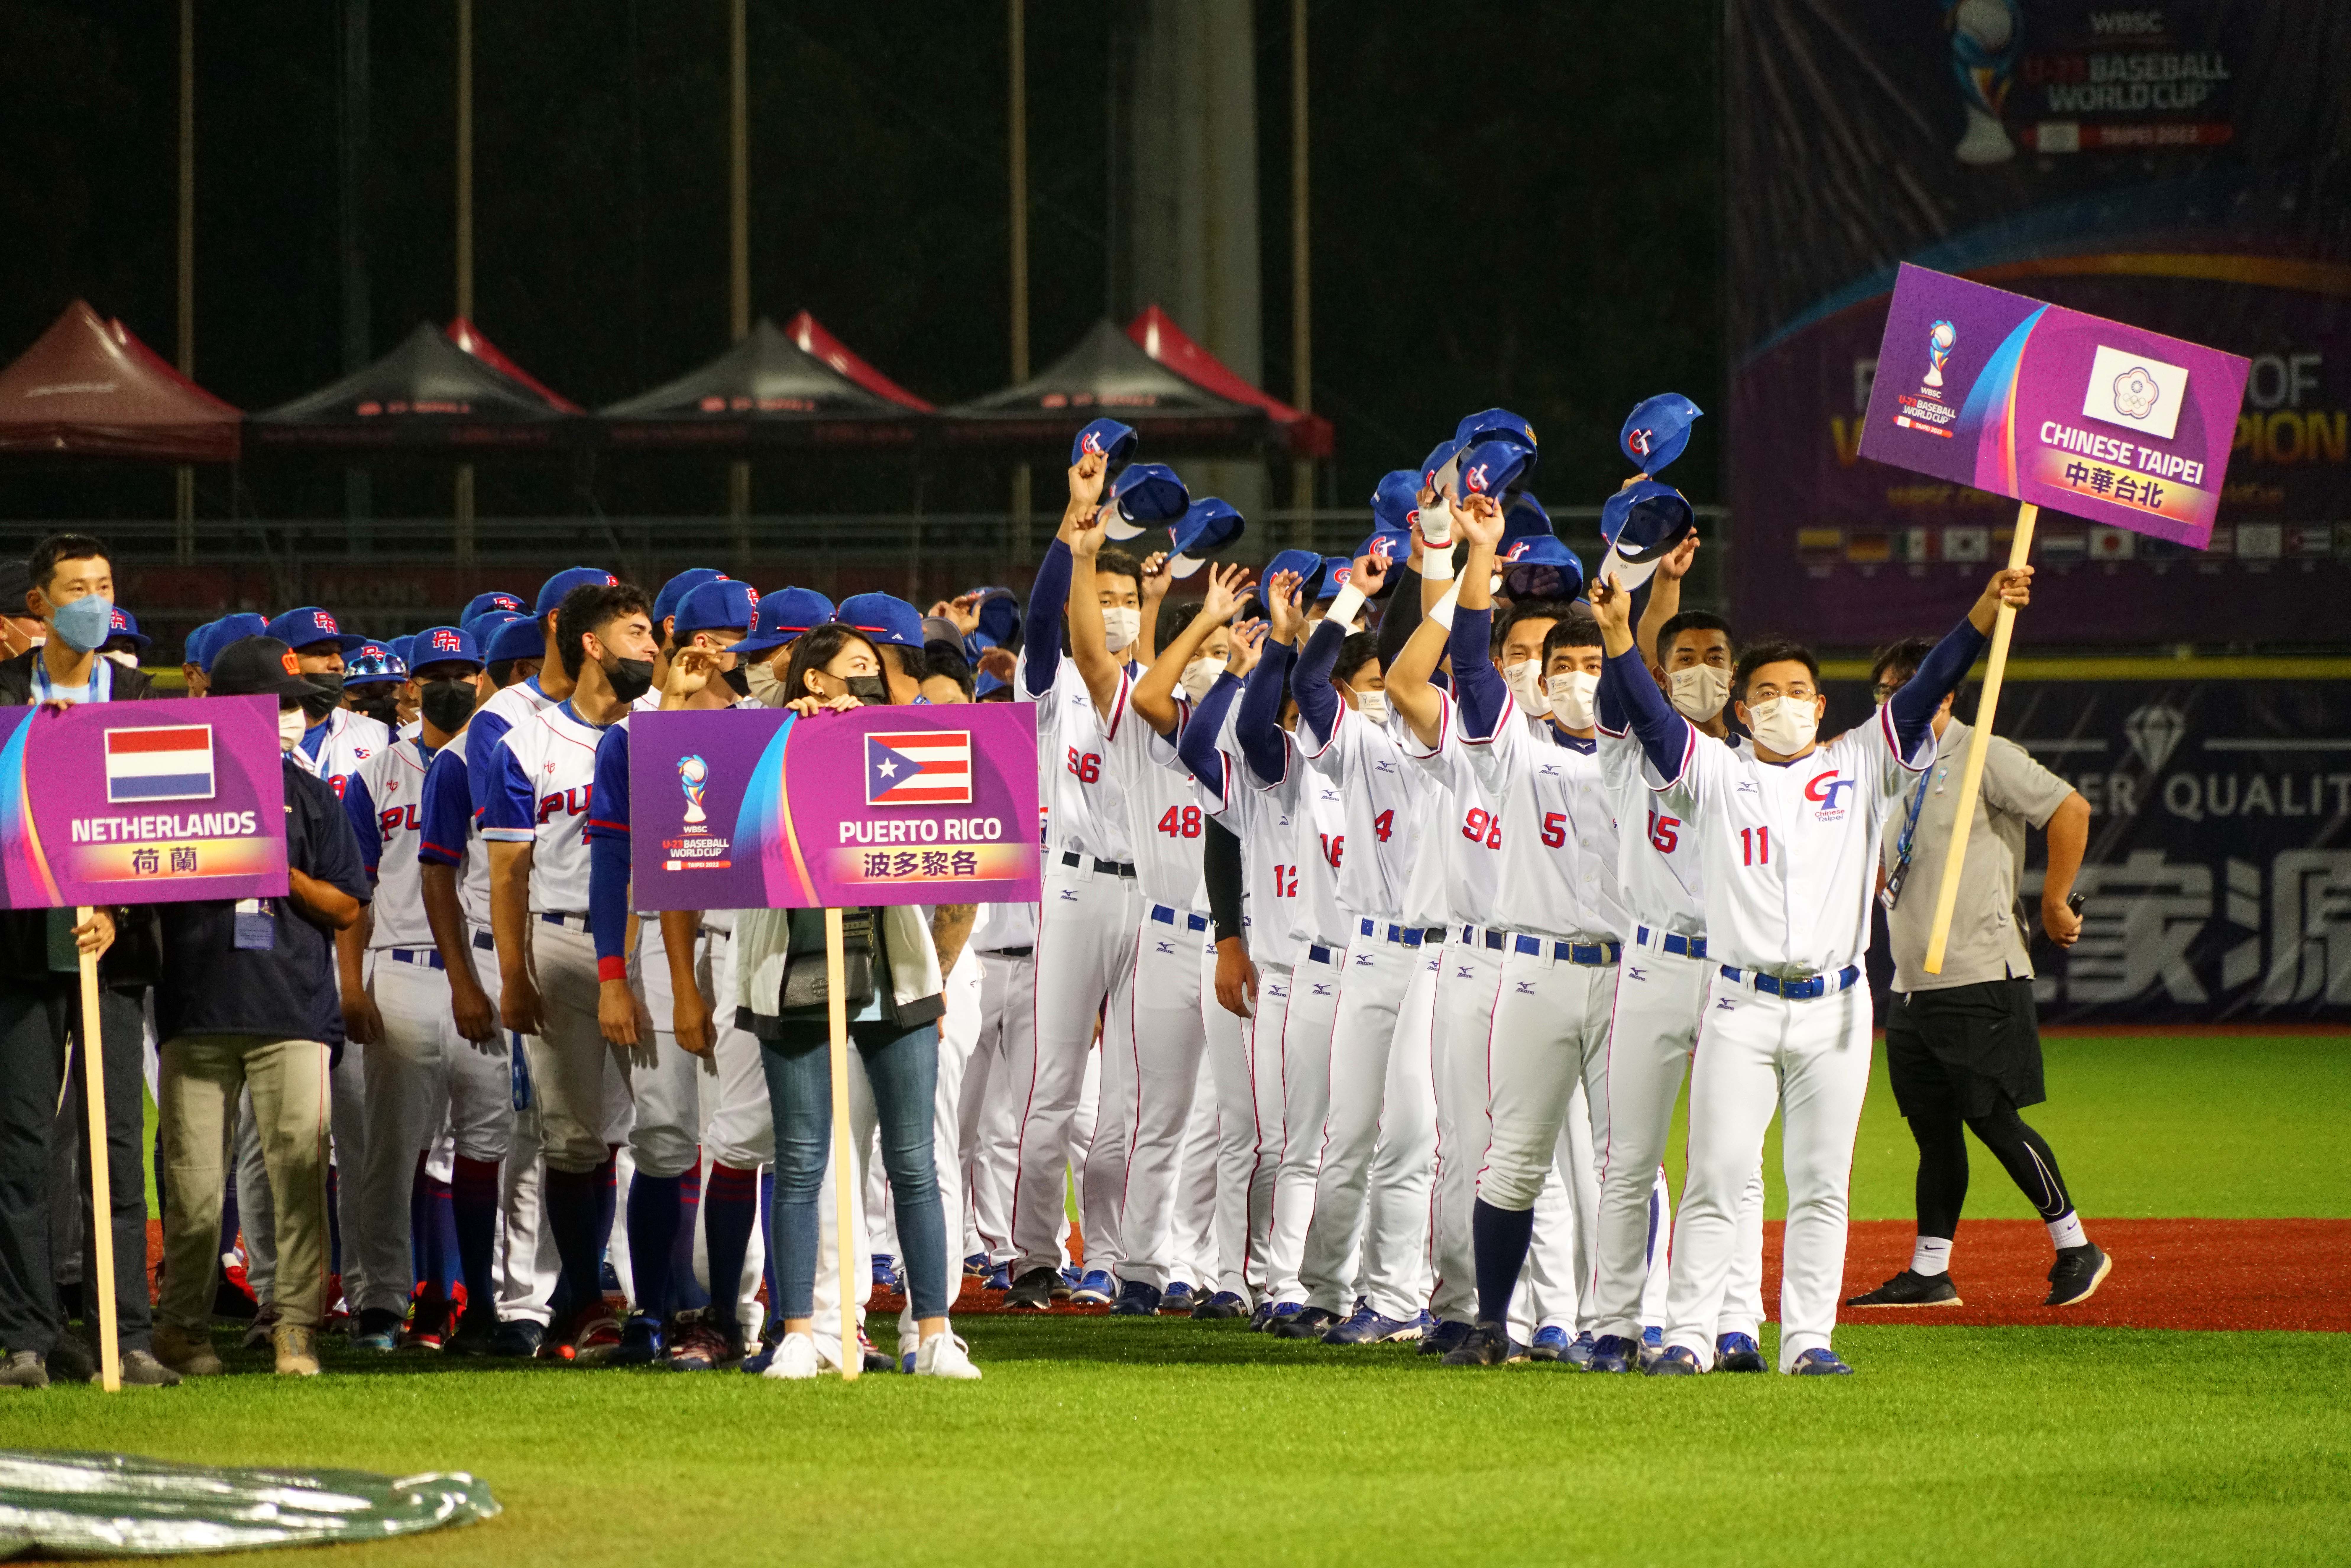 Teams participating in this year's WBSC U23 Baseball World Cup at the opening ceremony